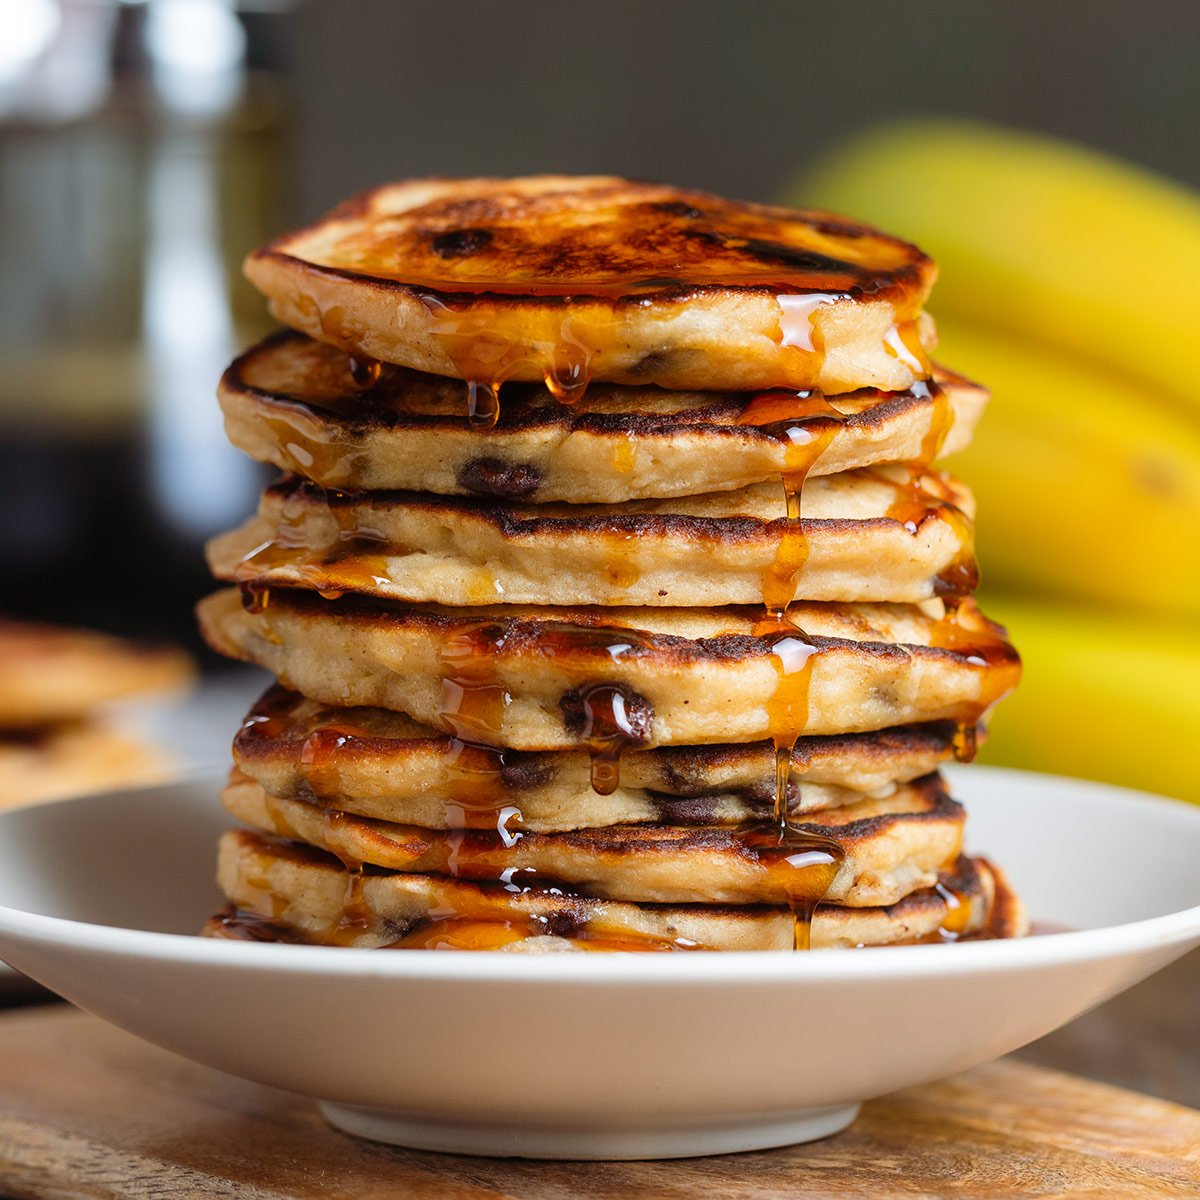 Light and fluffy banana chocolate chip pancakes. They're so easy to make, delicious, and freezer-friendly! If you love banana bread, you'll love these pancakes! #bananapancakes thehealthfulideas.com/banana-chocola…